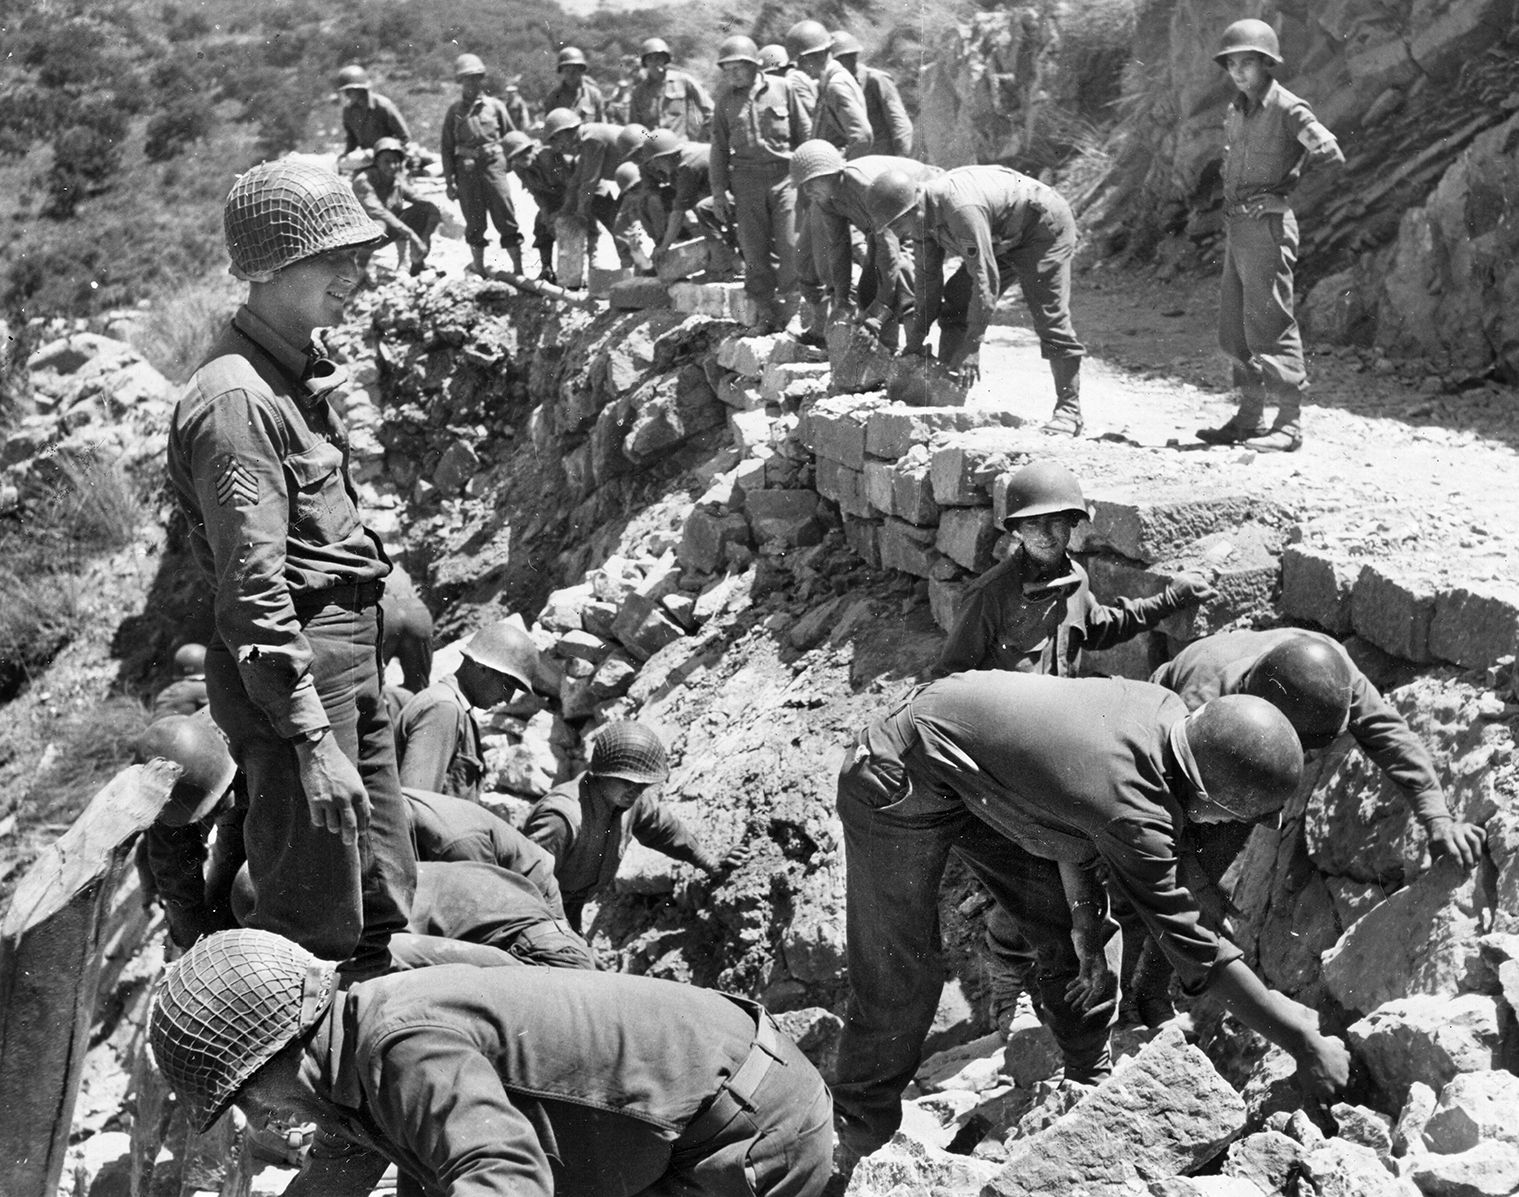 The Germans tried to slow the American advance from Palermo to Messia along the rugged northern coast of the island by destroying the roads. Here, American combat engineers work to repair the damage so the drive could continue.